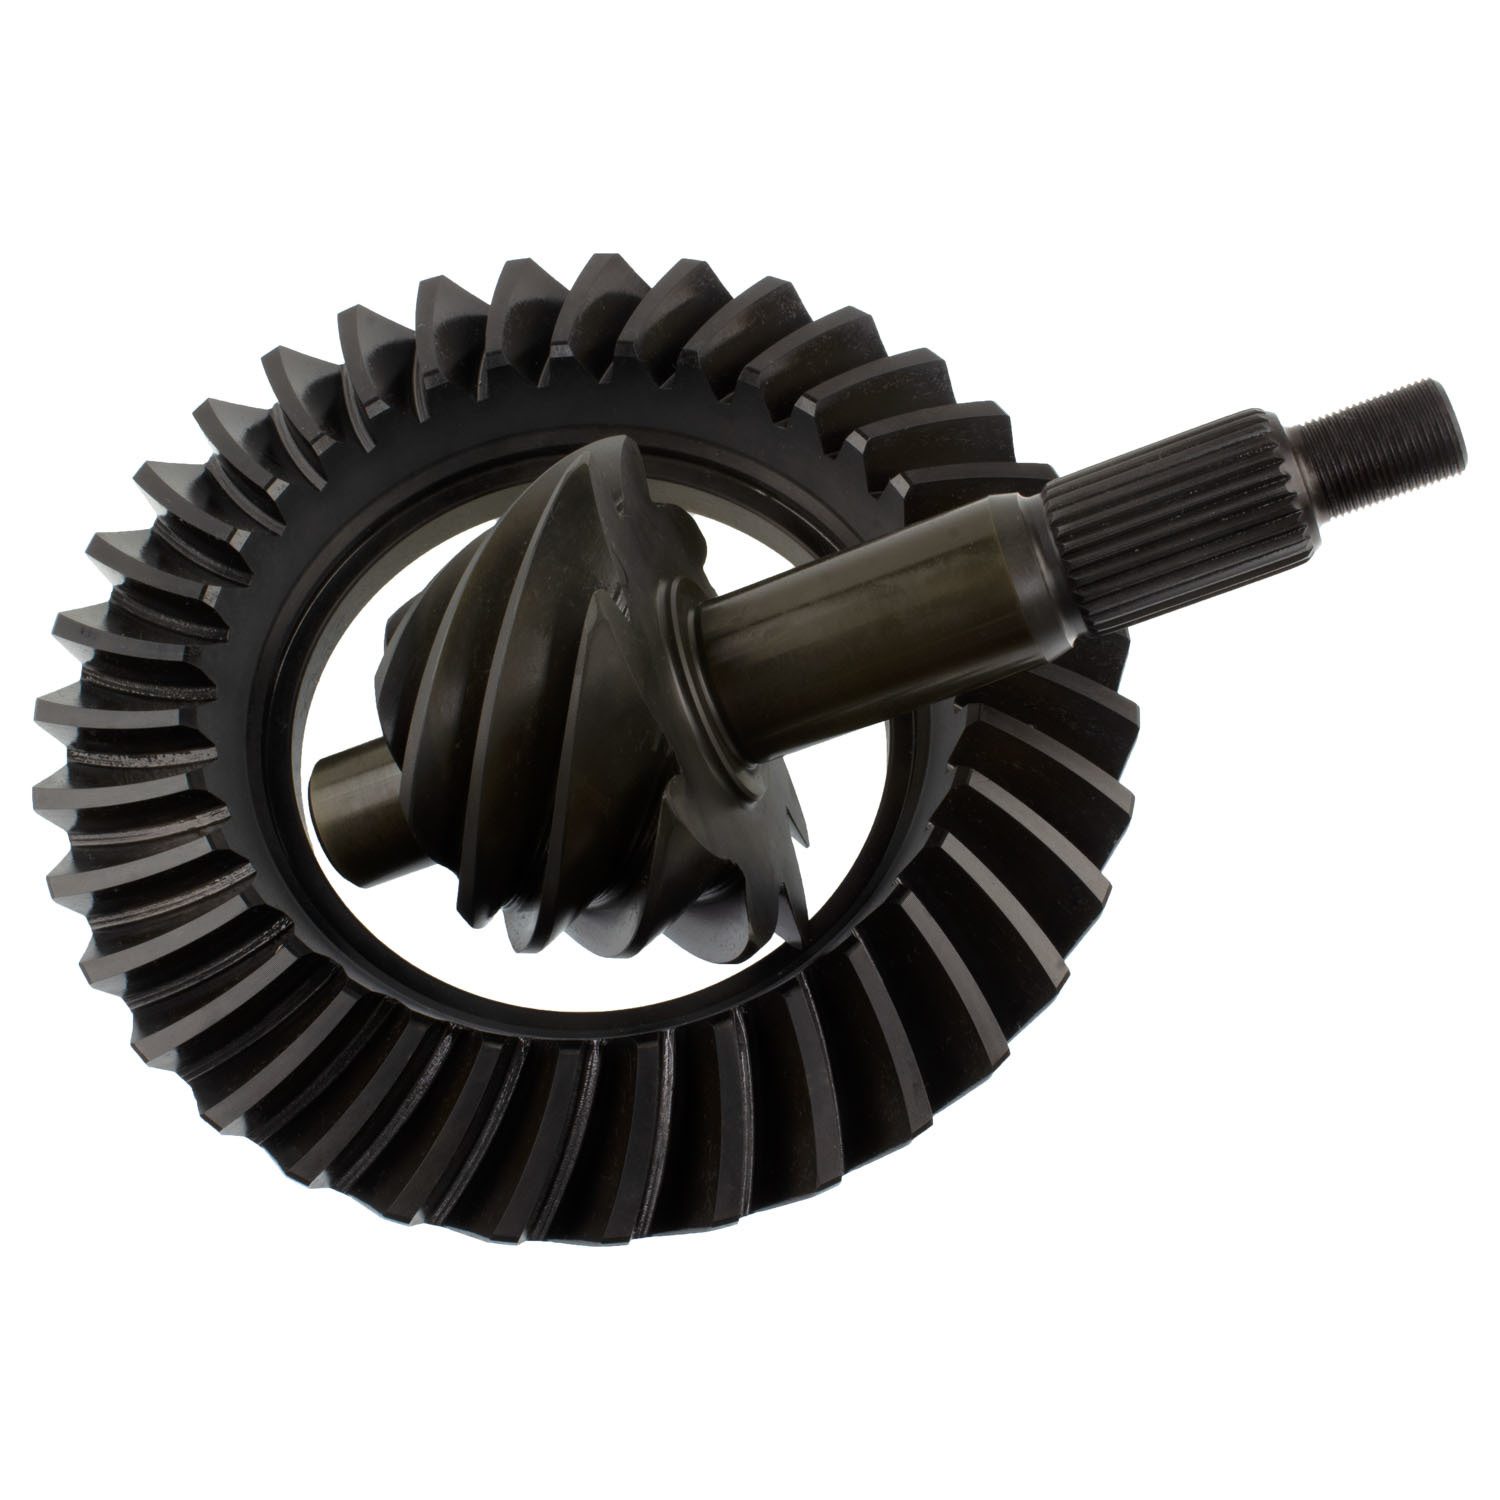 Richmond Gear F9389 - Ring and Pinion, Excel, 3.89 Ratio, 28 Spline Pinion, Ford 9 in, Kit